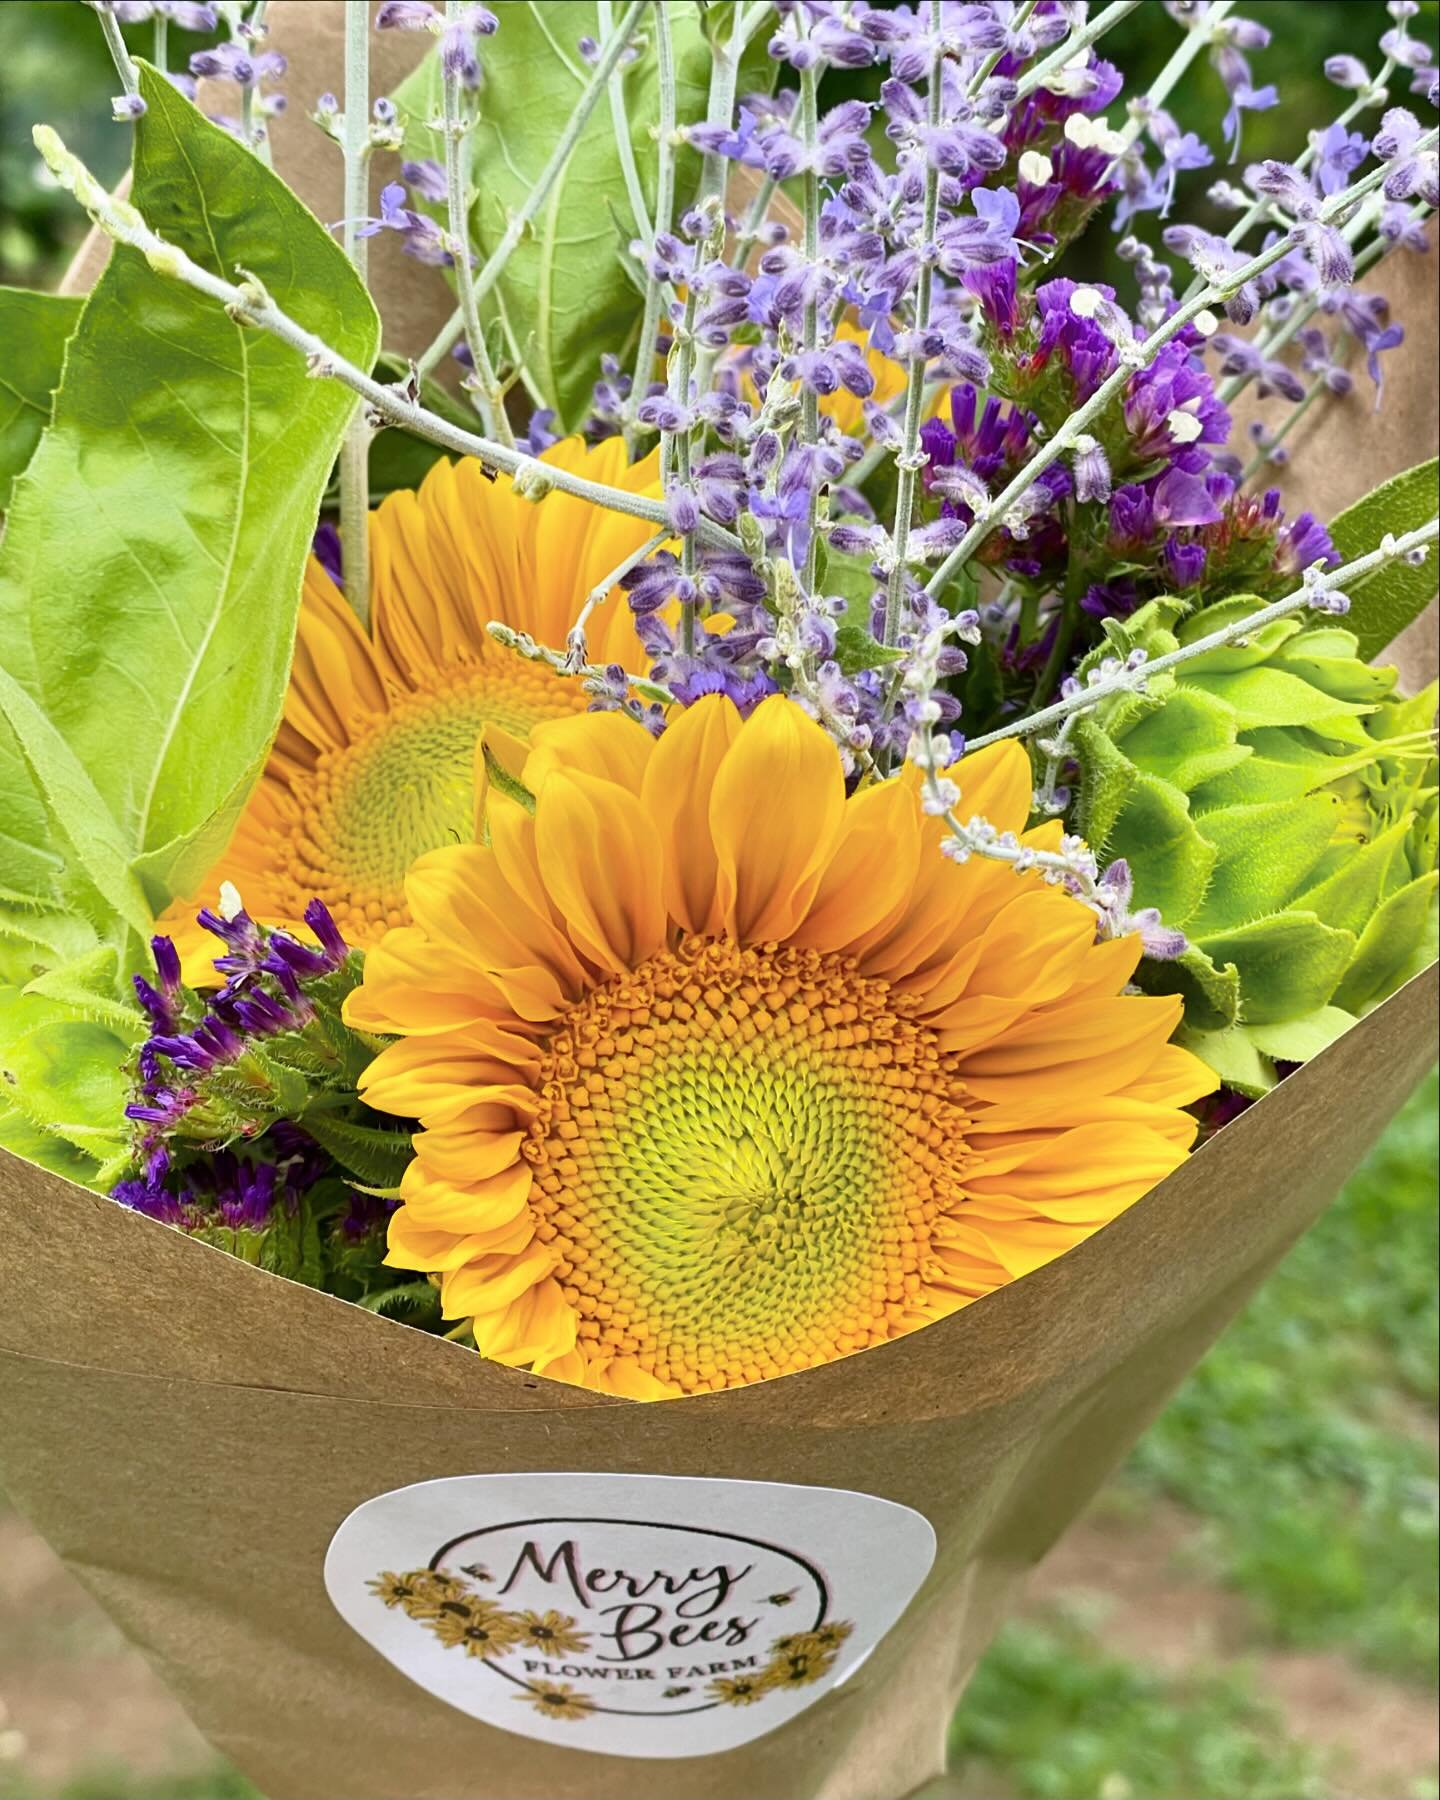 Mother&rsquo;s Day is coming. Don&rsquo;t give her flowers on one day&mdash;give her six weeks of fresh, local flowers this summer. Order her a subscription now, and I&rsquo;ll send you a PDF certificate you can put in a card. Be unique and give a gi